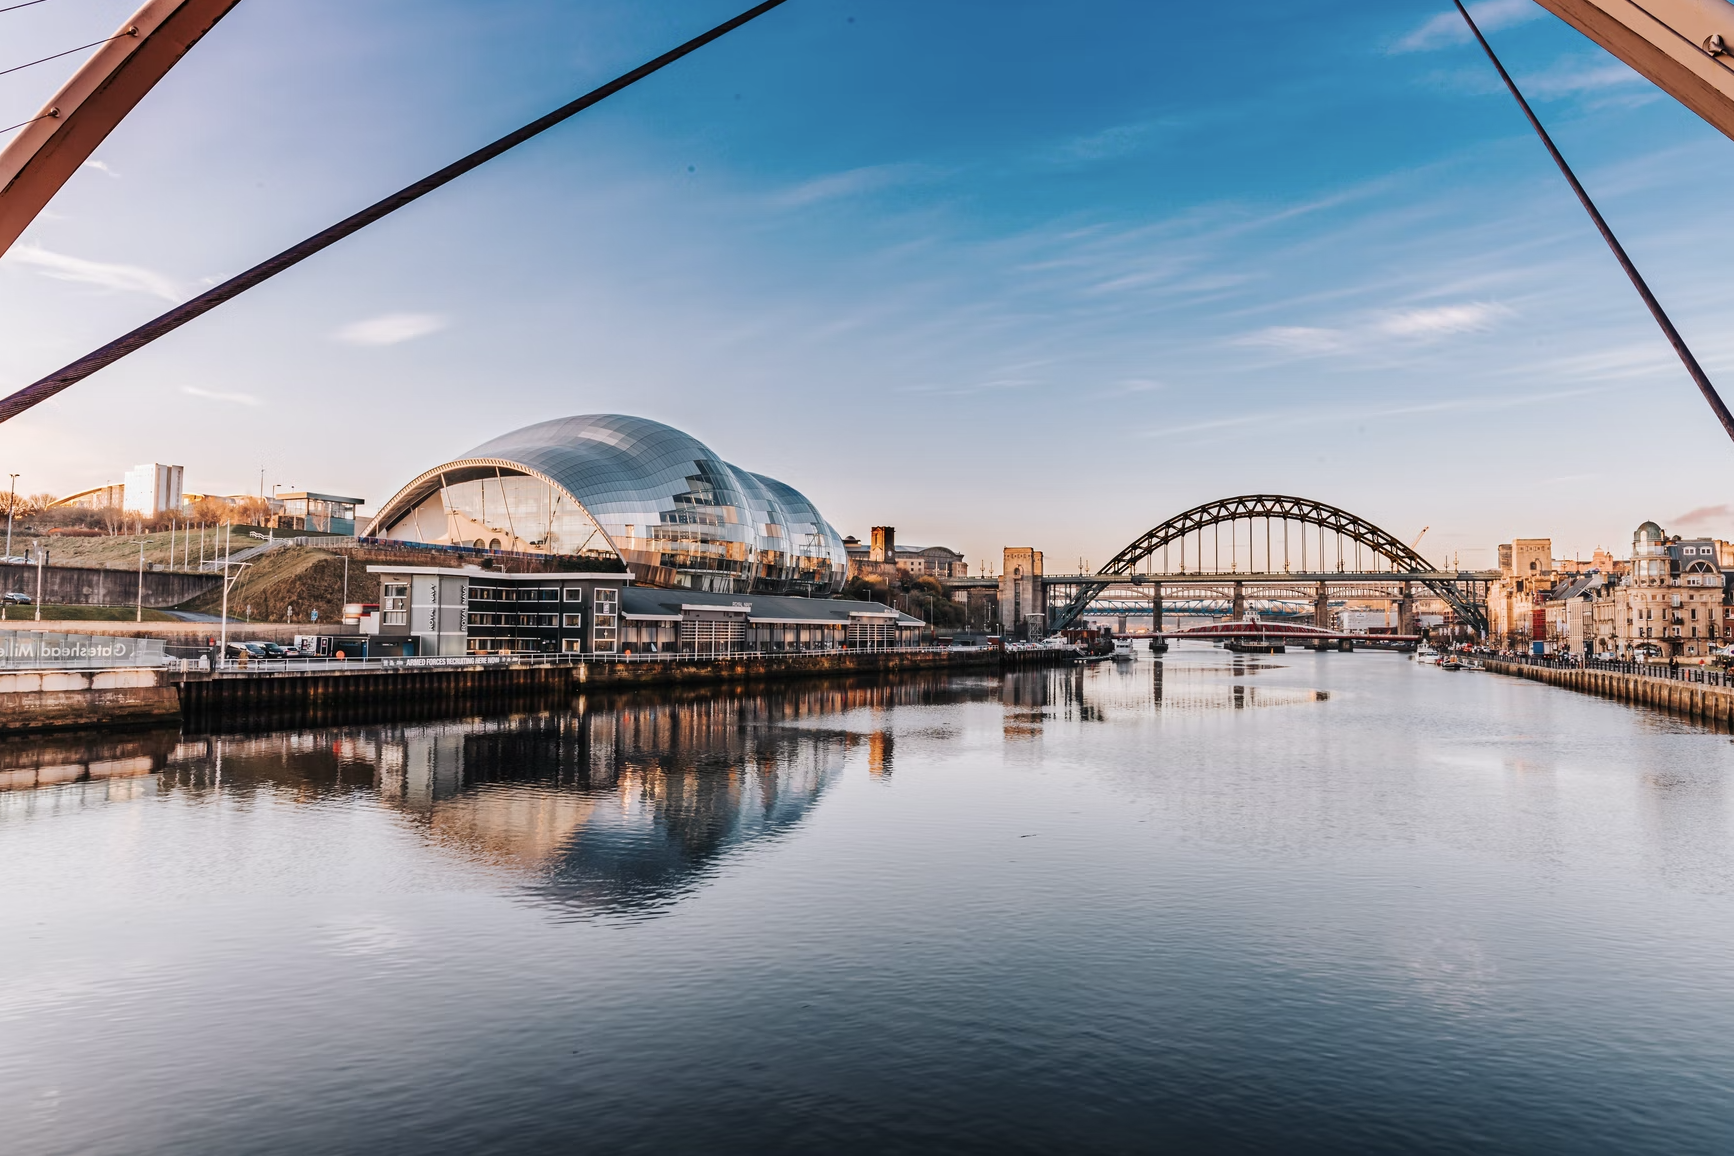 North East England invites international FinTech firms to FinTech North’s conference in July